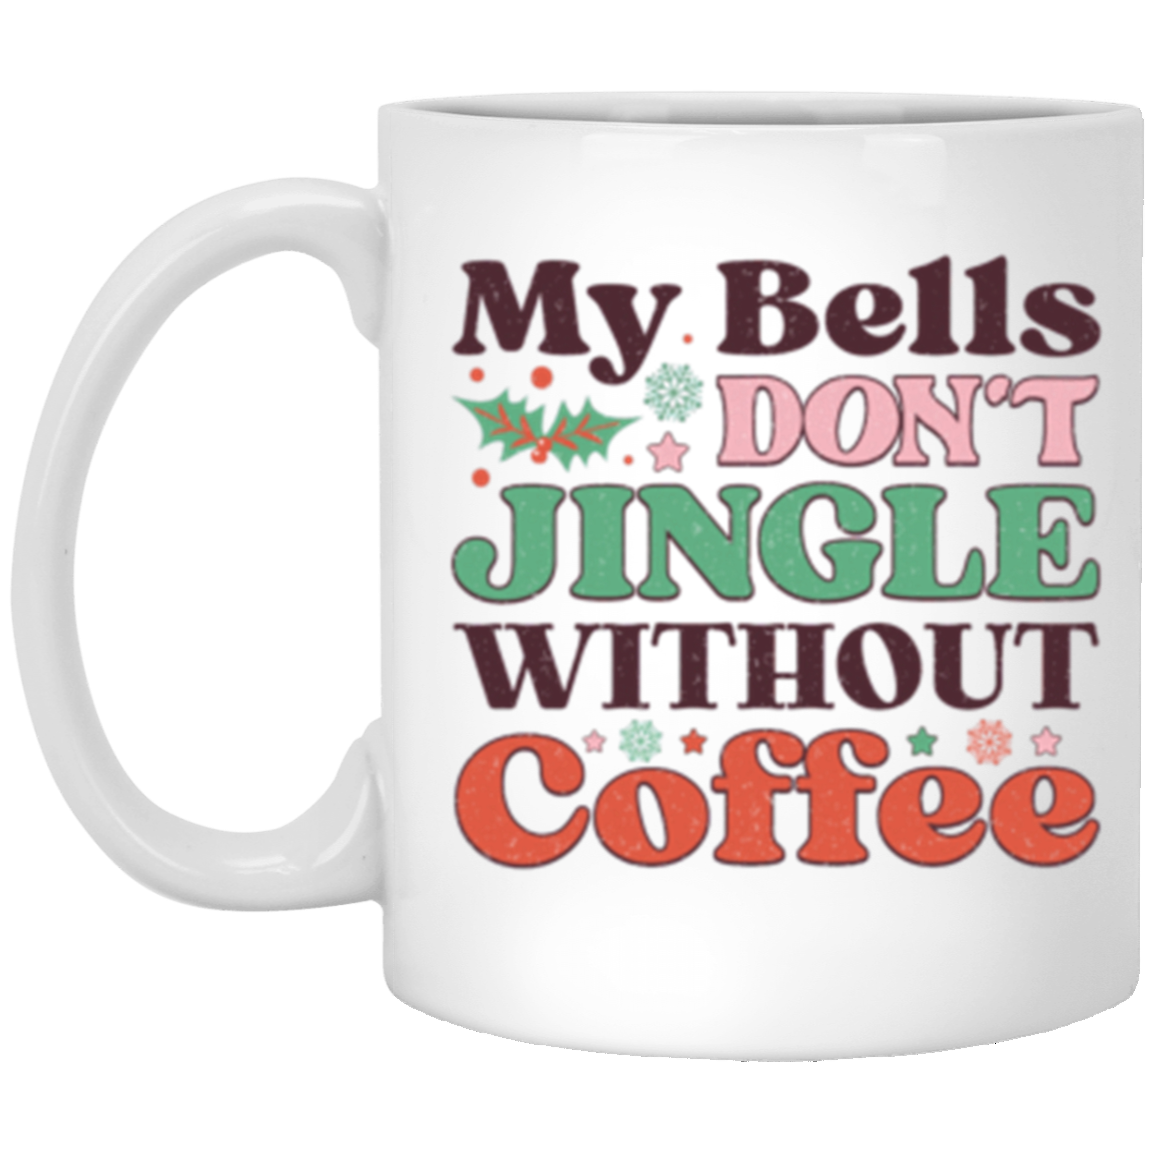 My Bells Don't Jingle Without Coffee, envoltura completa - 11 y 15 oz. Taza blanca